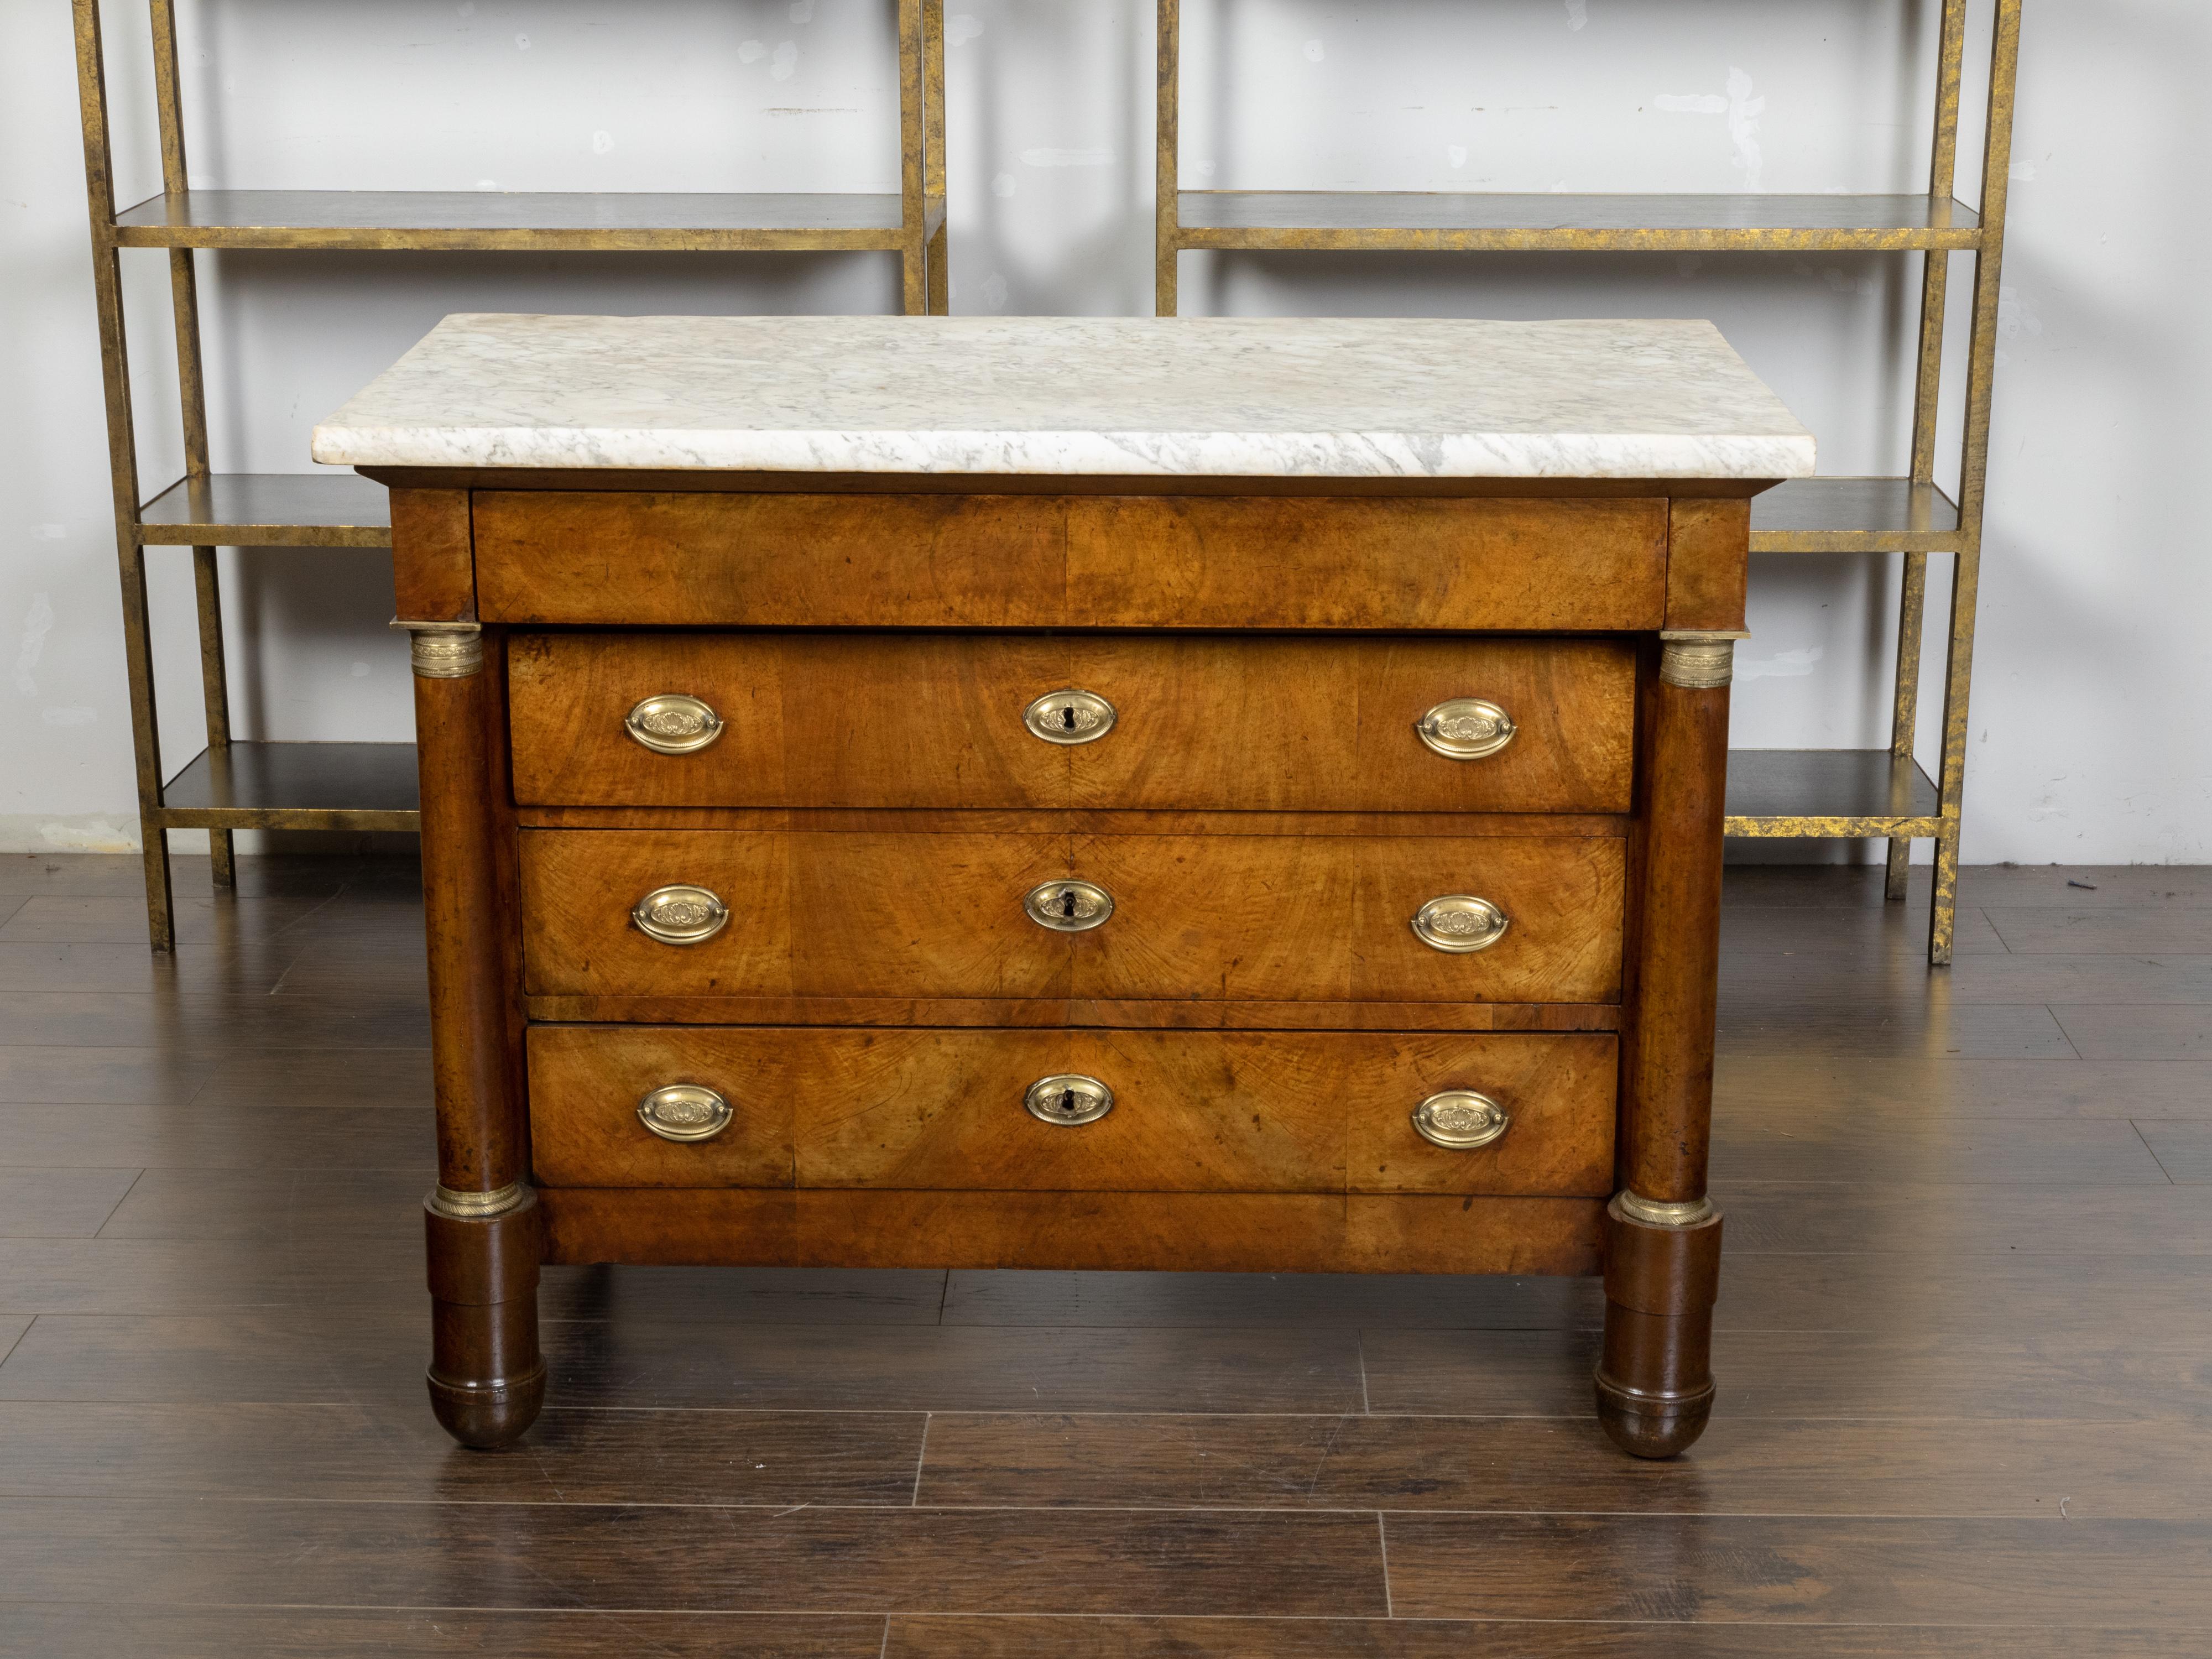 A French Empire commode from the 19th century, with white marble top, four drawers, butterfly veneer, bronze mounts and column-shaped posts. Created in France during the 19th century, this Empire commode features a rectangular white marble top